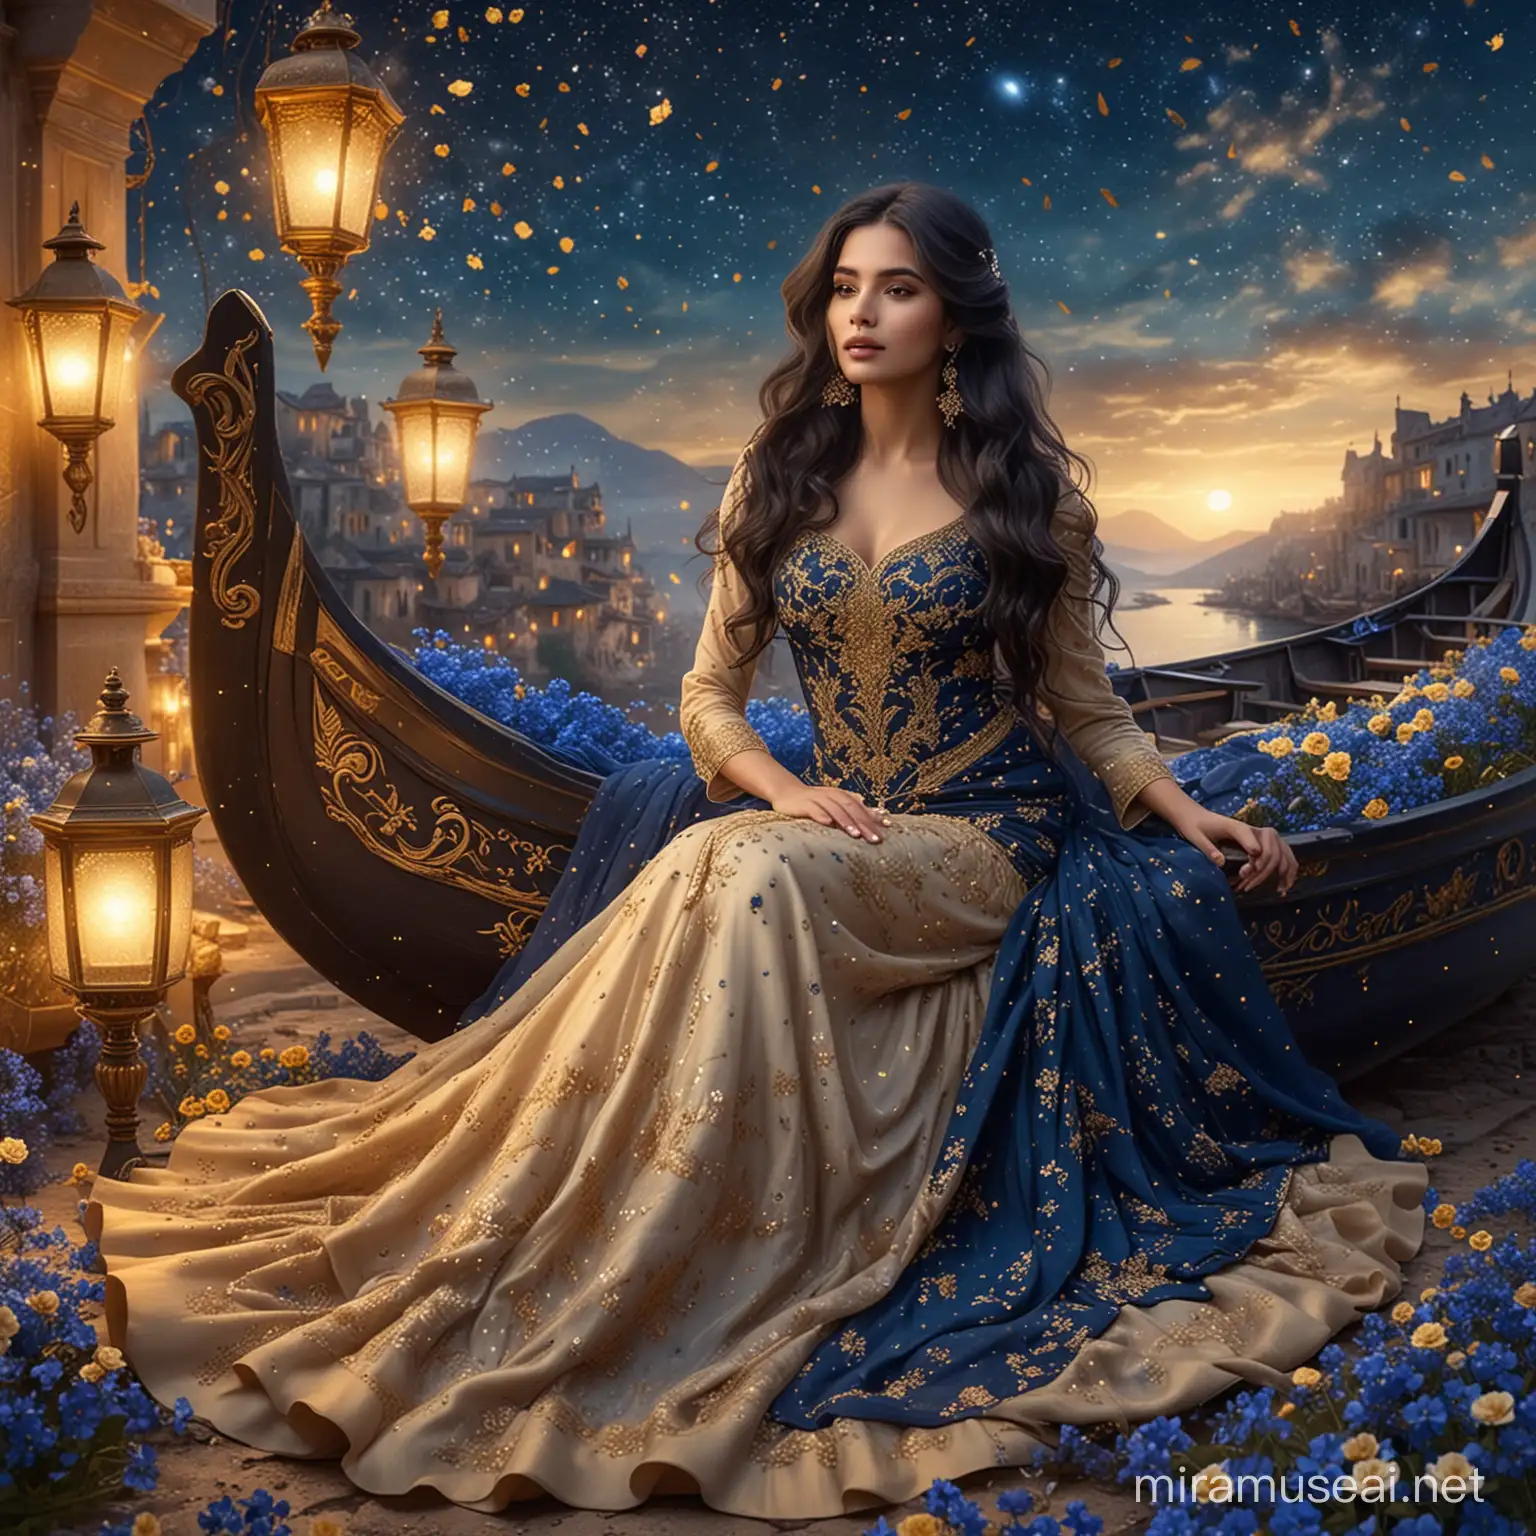 A beautiful woman, sitting on a floral boat in the flower realm ,surrounded by small dark blue flowers and golden dust. Long wavy black hair. Elegant long beige and dark blue dress, haute couture, sari tissu. Background nebula sky with golden light. background golden dust and old lamps.  8k, fantasy, illustration, digital art, illustration art, fantasy art, fantasy styl